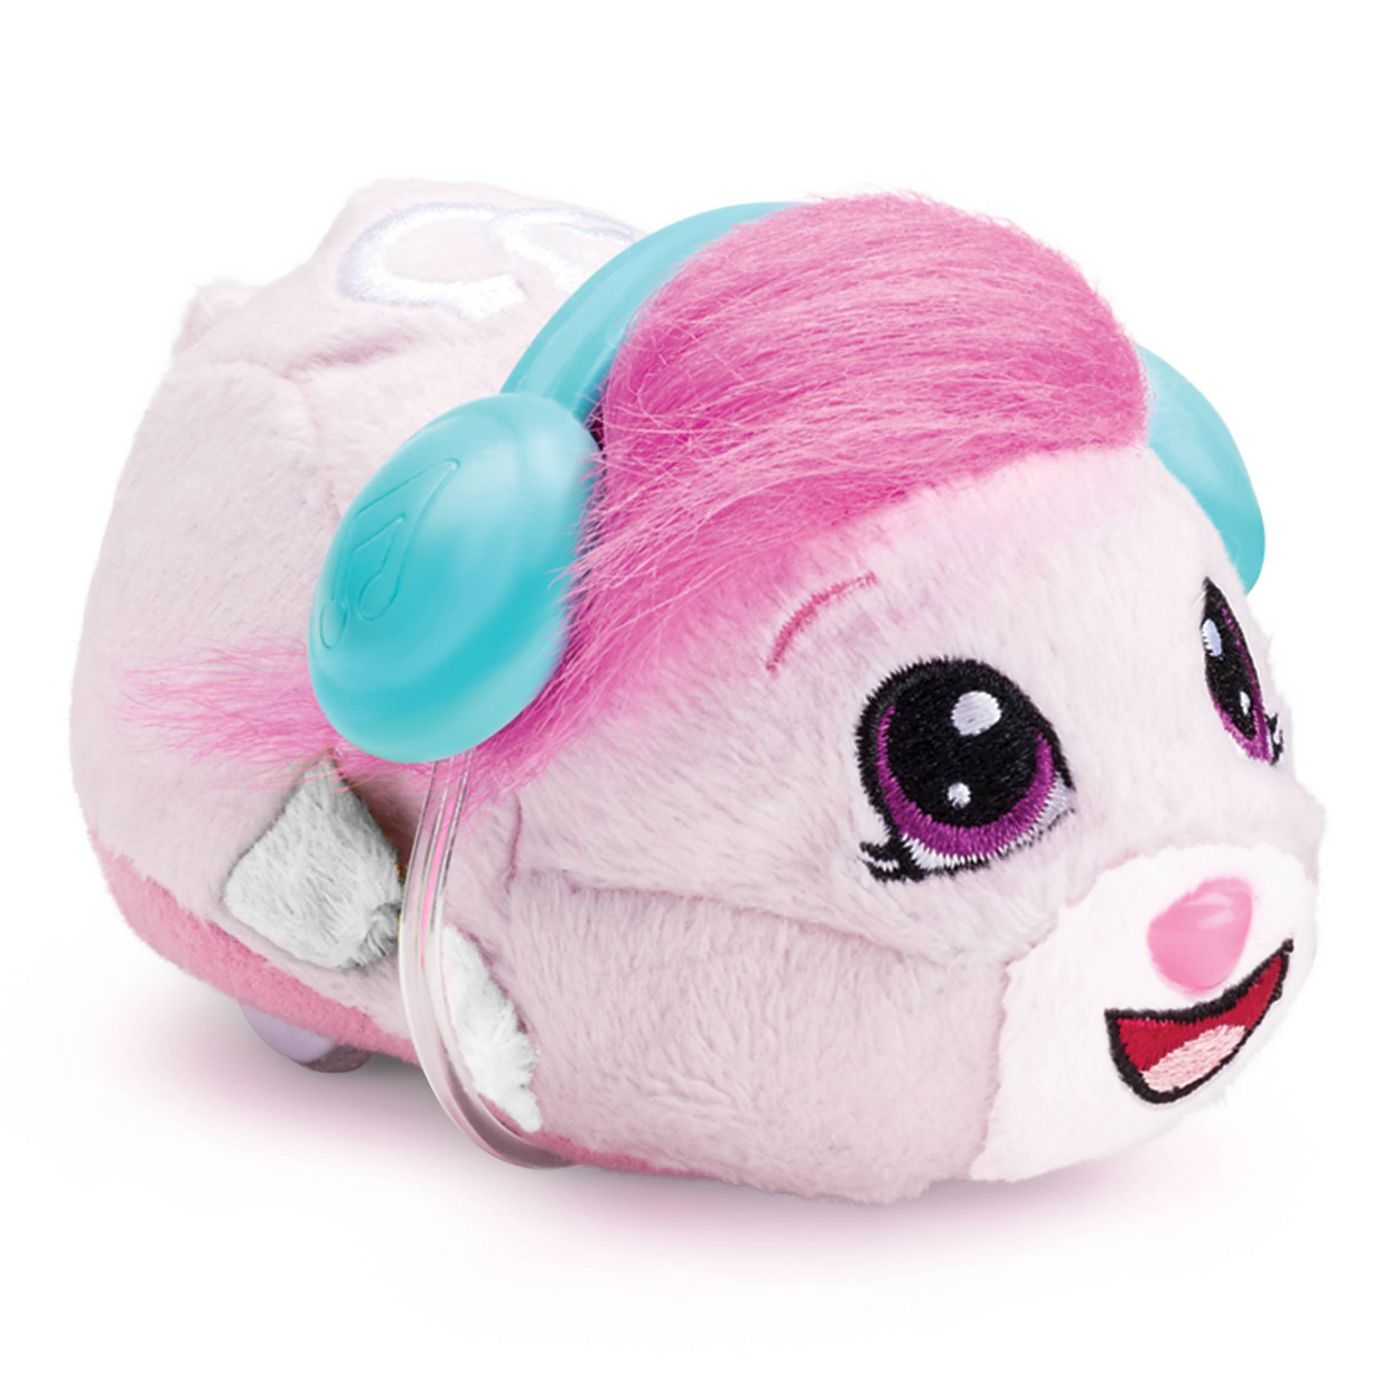 Zhu Zhu Pets – Vacation Rumer 4″ Hamster Toy with Sound and Movement